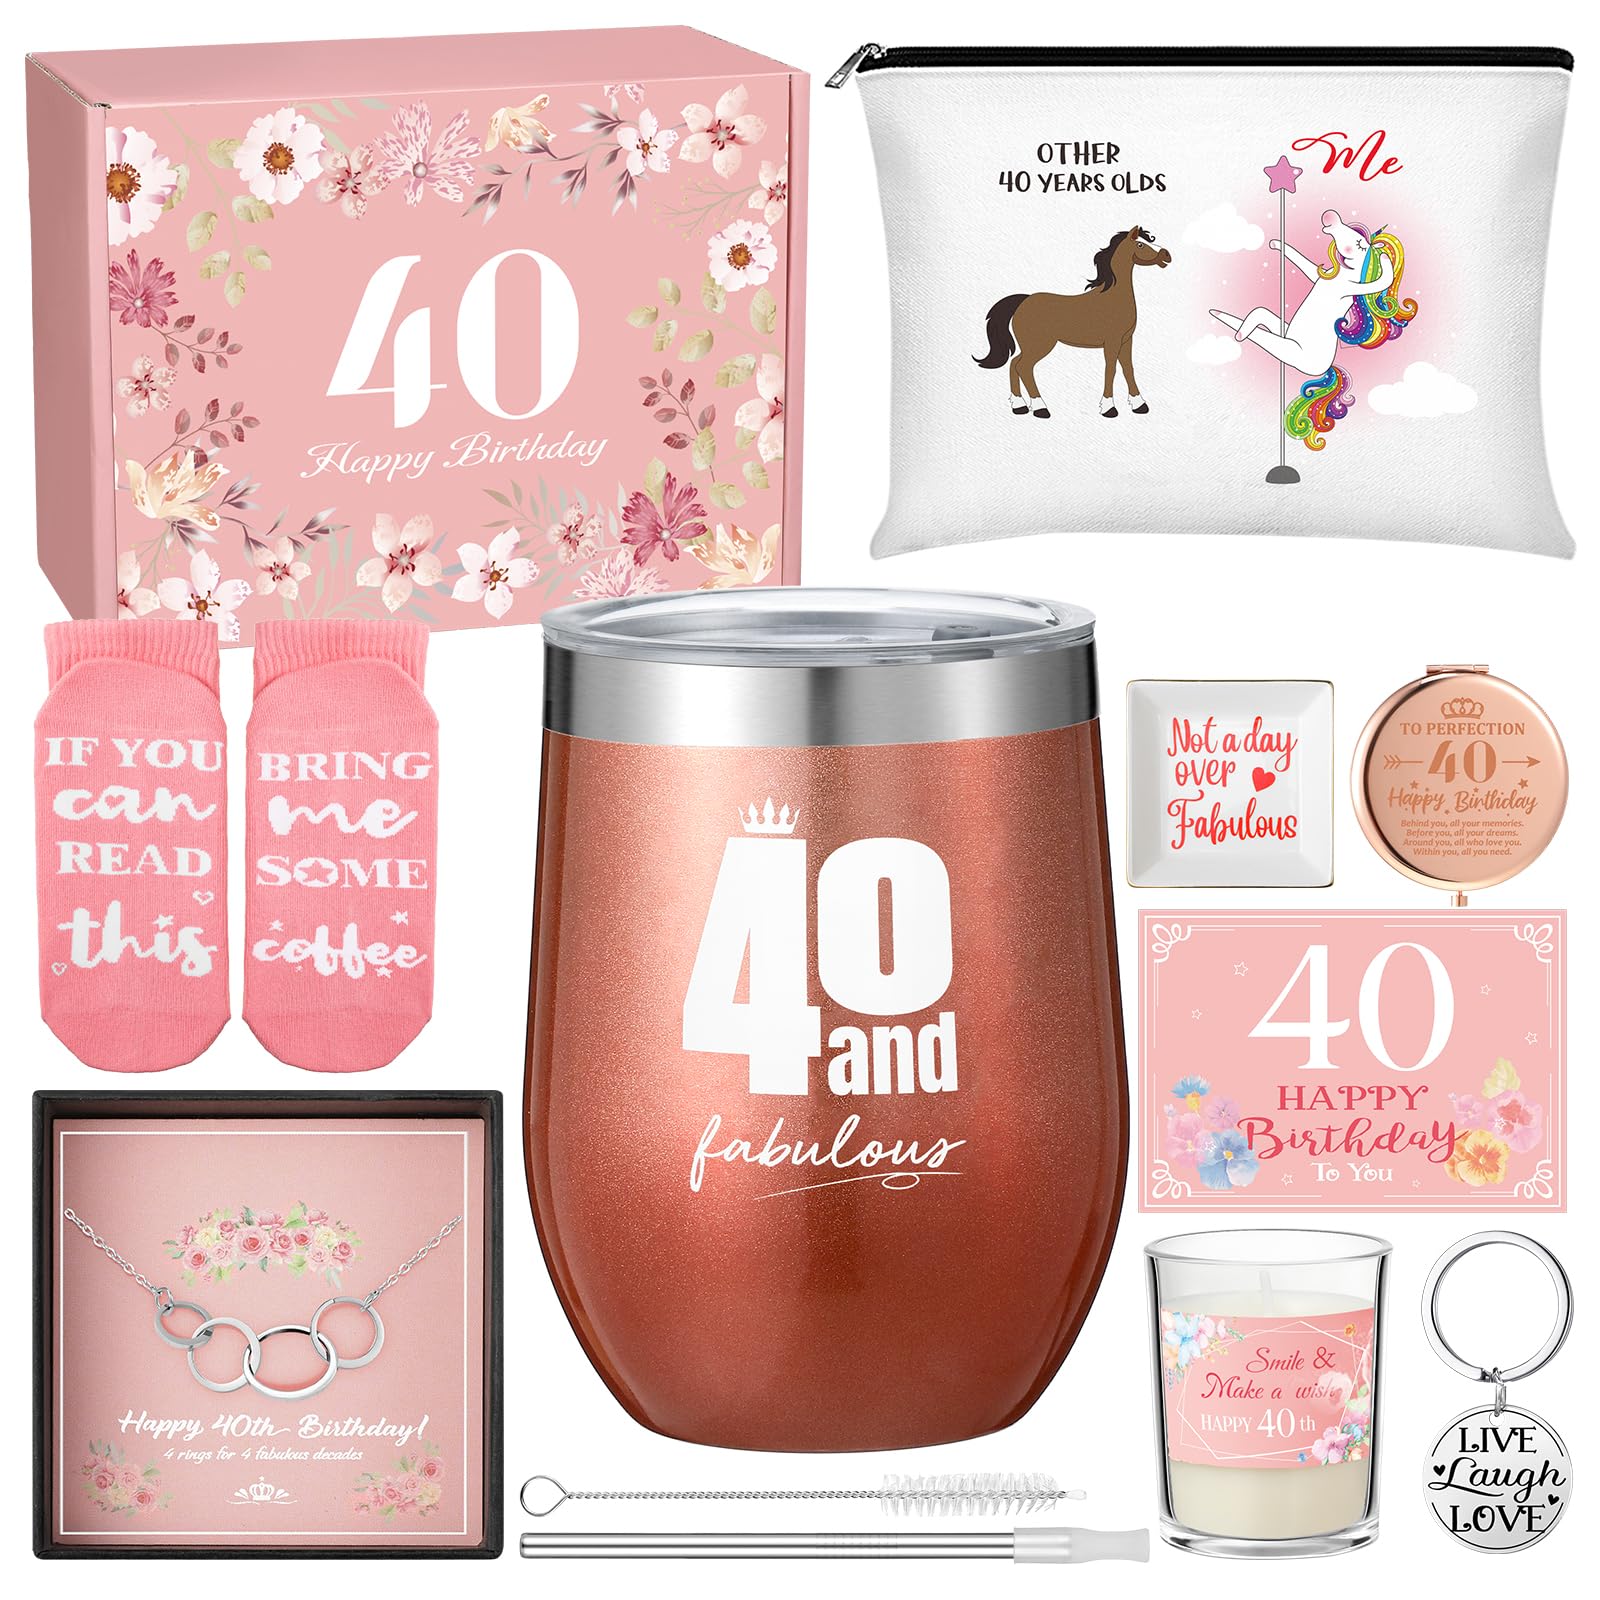 Umigy 10 Pcs 40th Birthday Gifts Box Other 40 Year Olds Gifts Set 40 and Fabulous Birthday Gifts Women 1983 Funny Gifts Ideas for Mom Grandma Sister Wife Turning 40 Years Old Bday Gifts